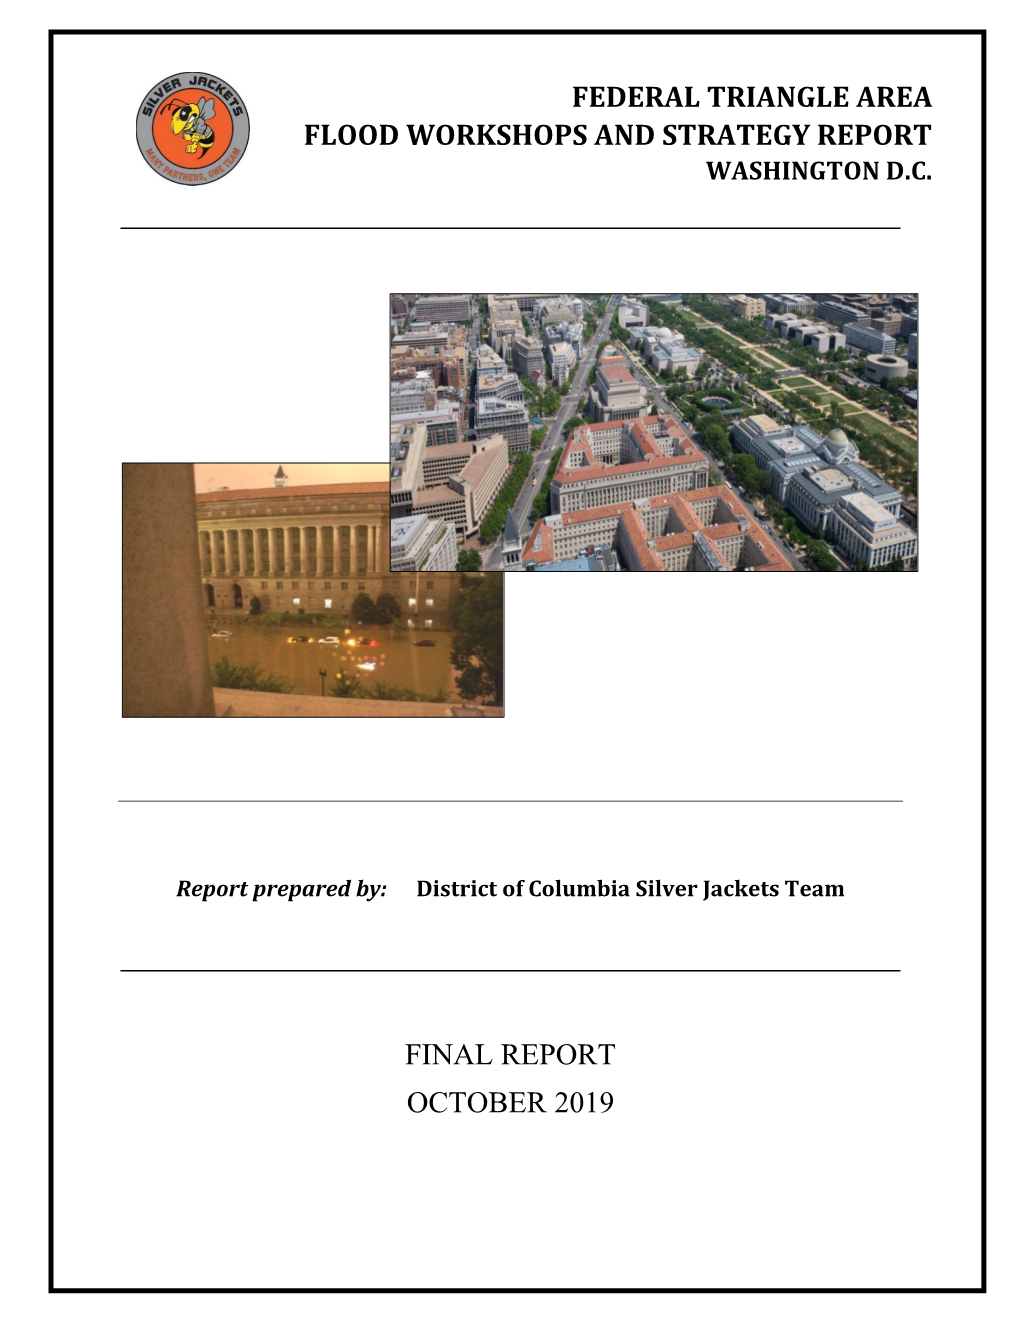 Federal Triangle Area Flood Workshops and Strategy Report Washington D.C